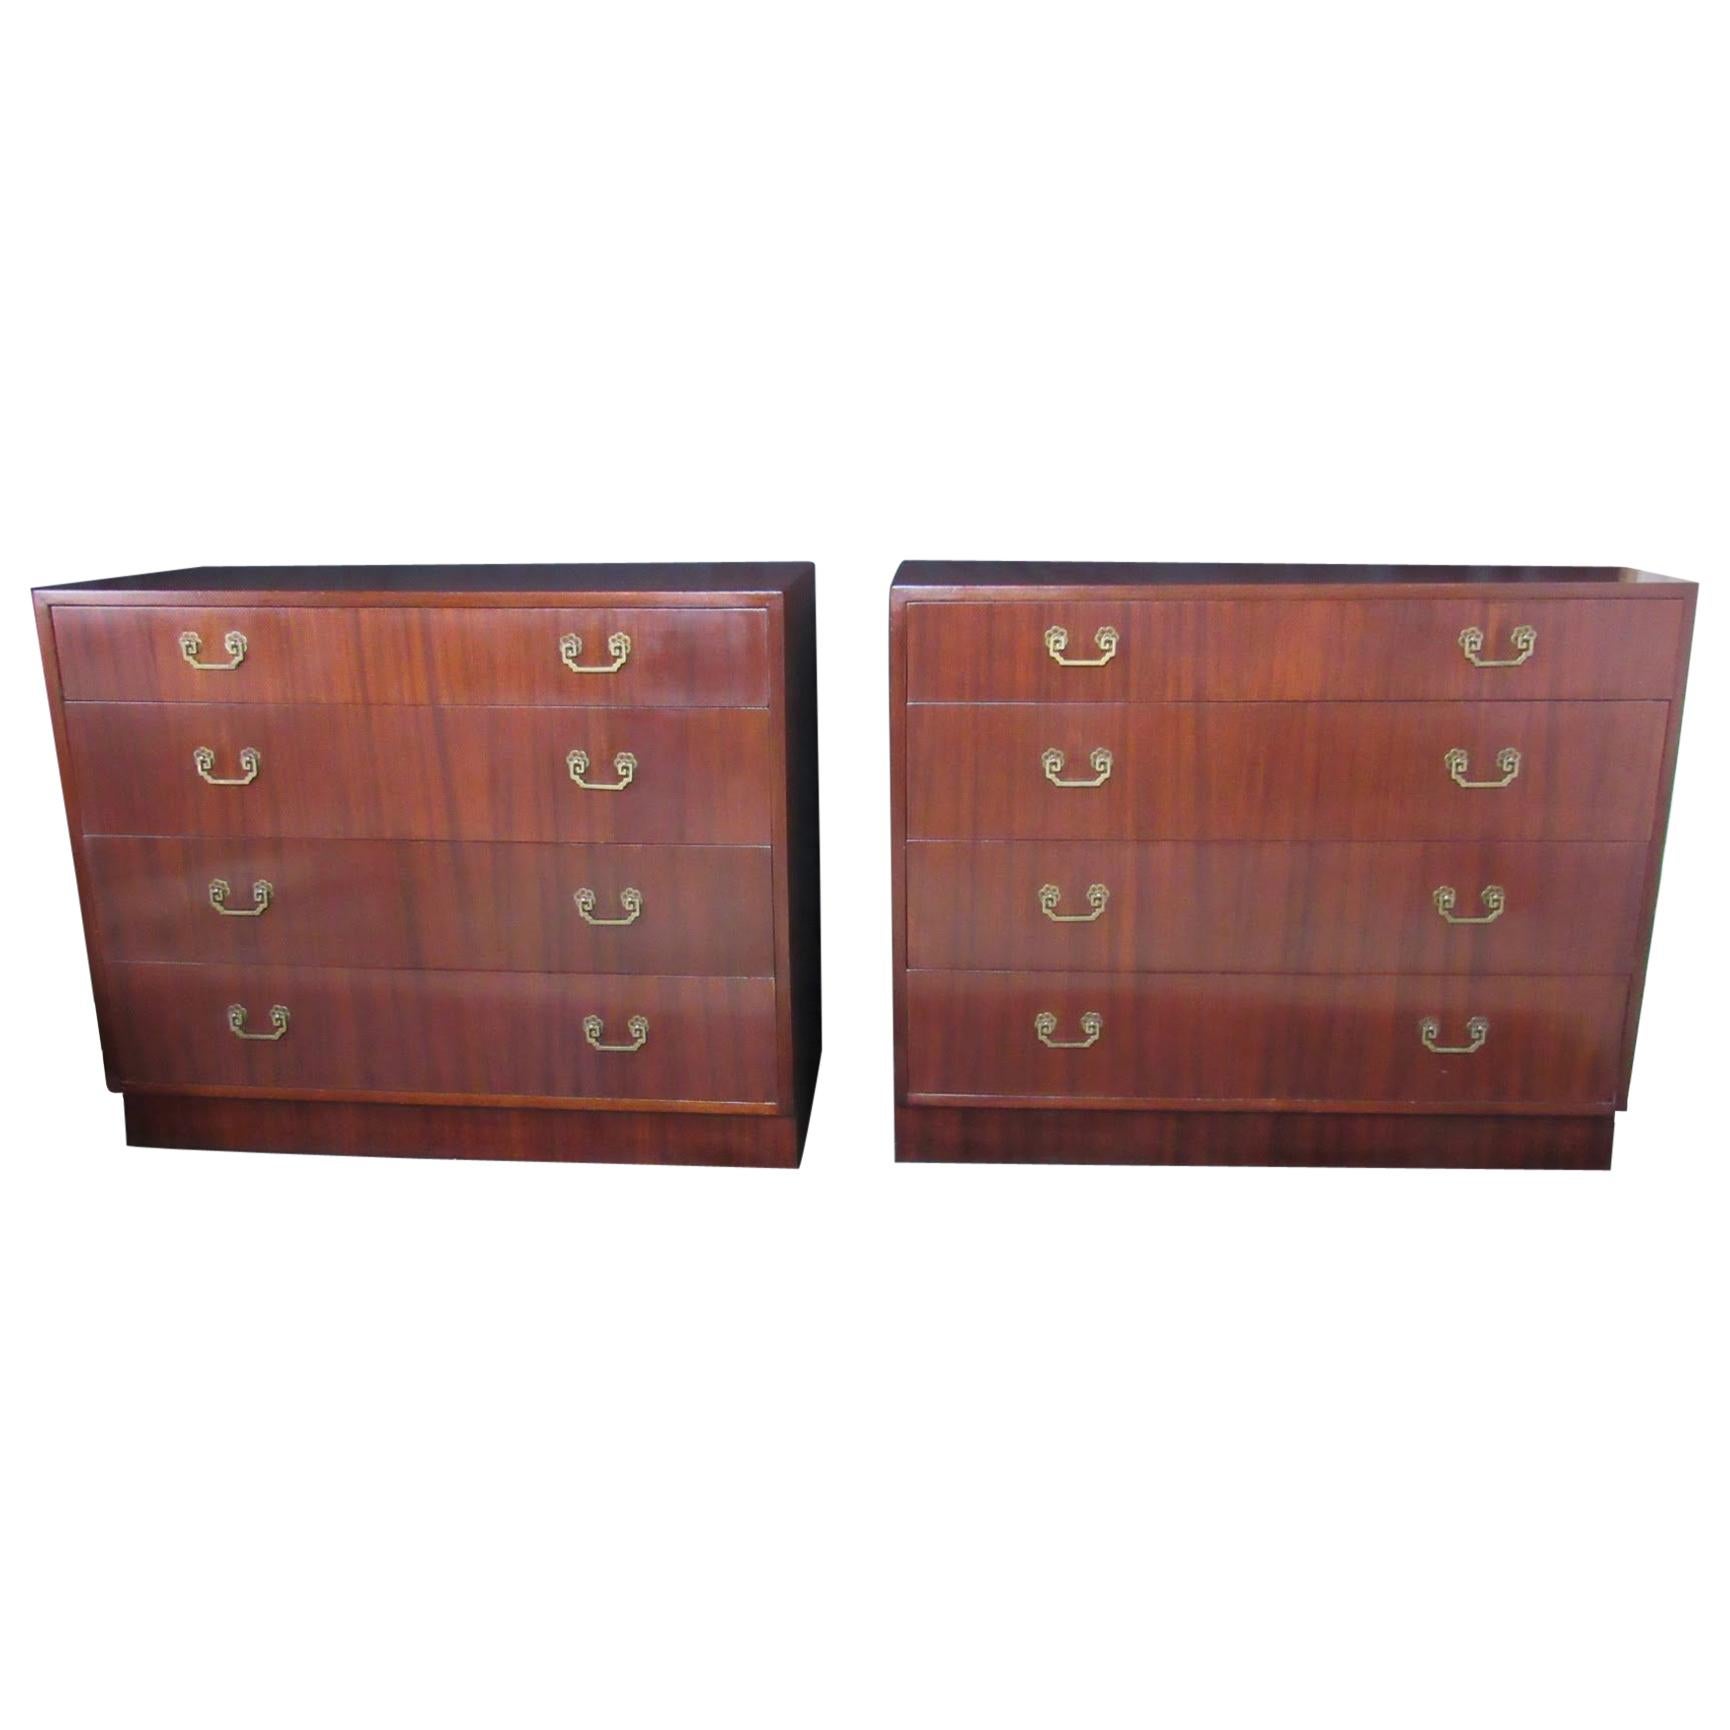 Mahogany Dressers Four-Drawer Matched Pair, 1940s